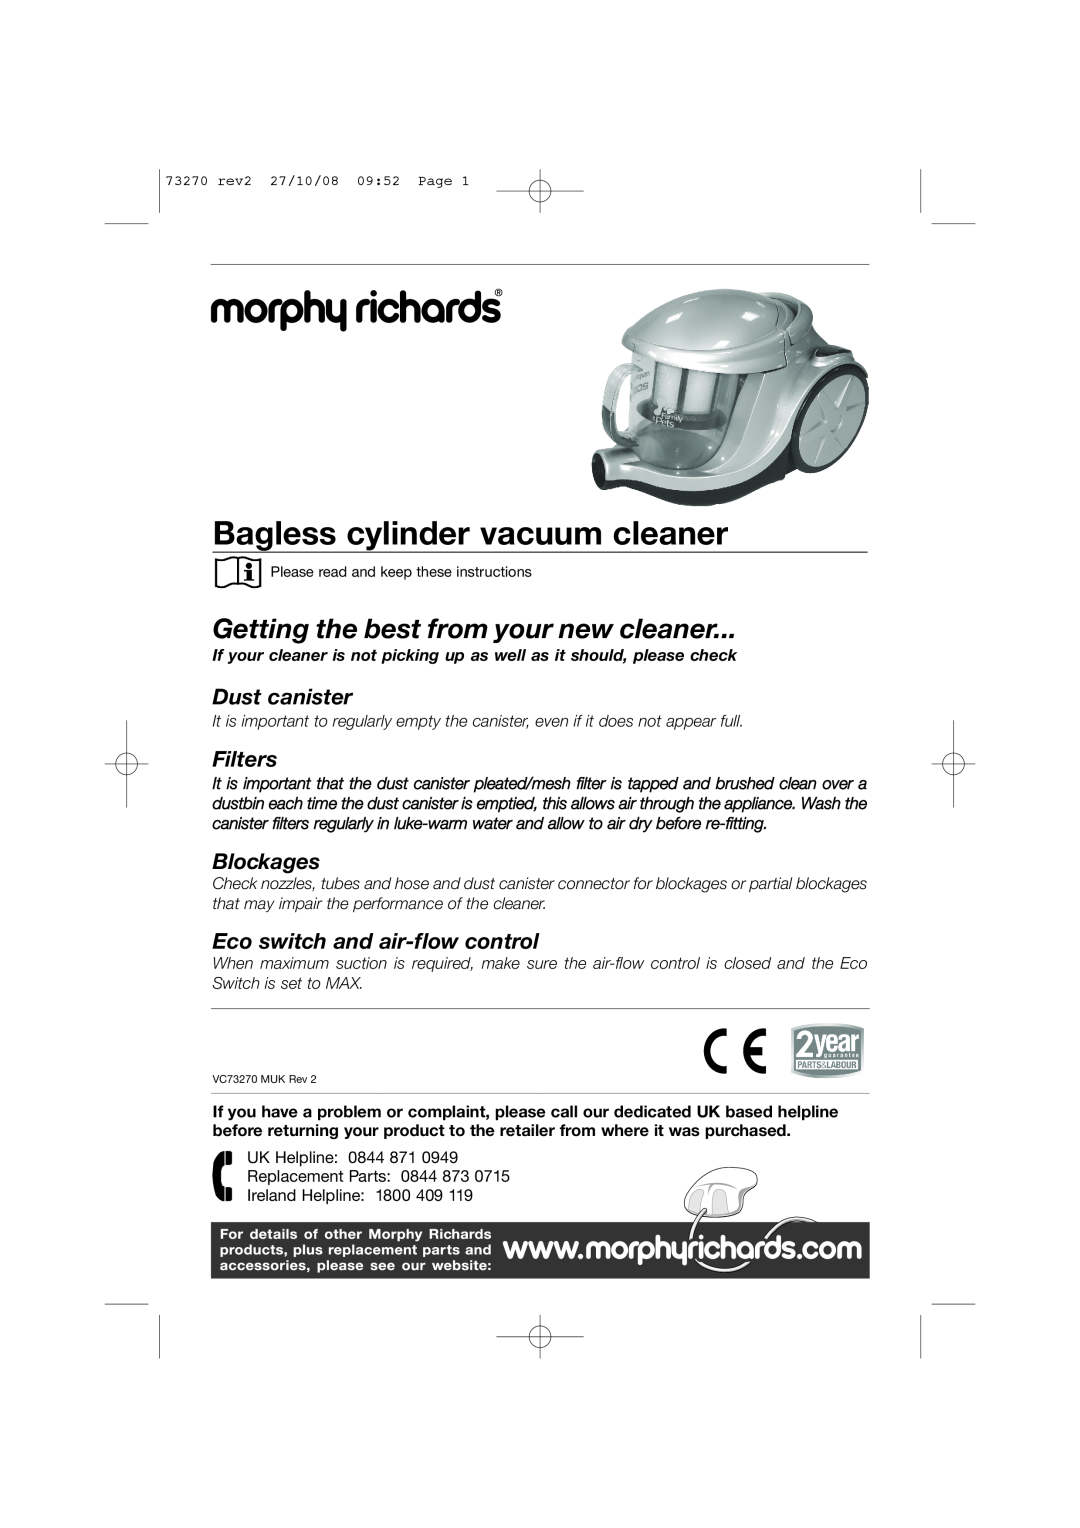 Morphy Richards 73270 manual Bagless cylinder vacuum cleaner, Getting the best from your new cleaner, Dust canister 